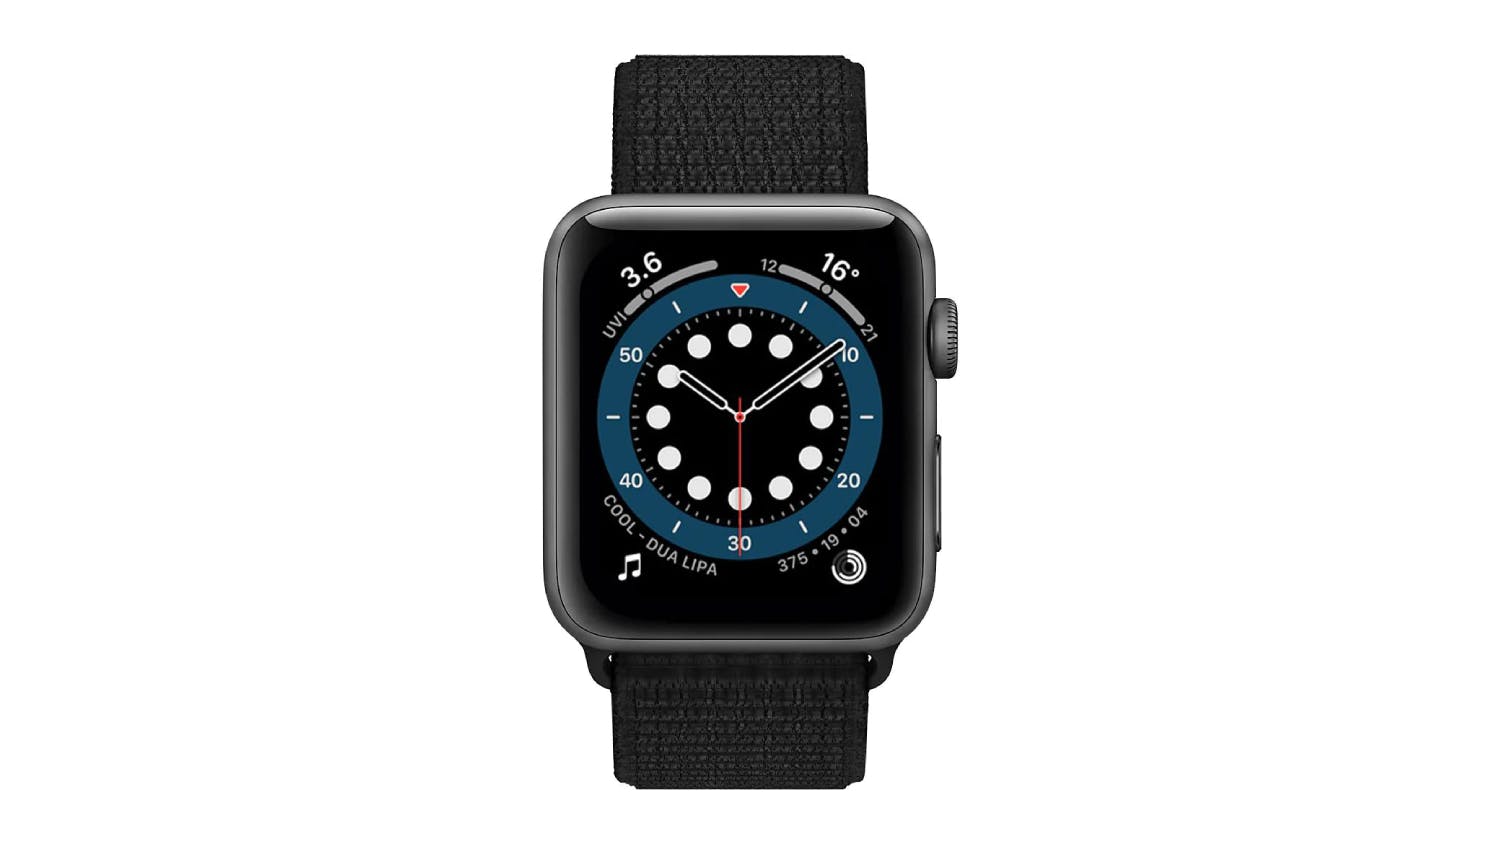 3sixT Nylon Weave Band for Apple Watch - Black (Fit Case Size 38/40mm)